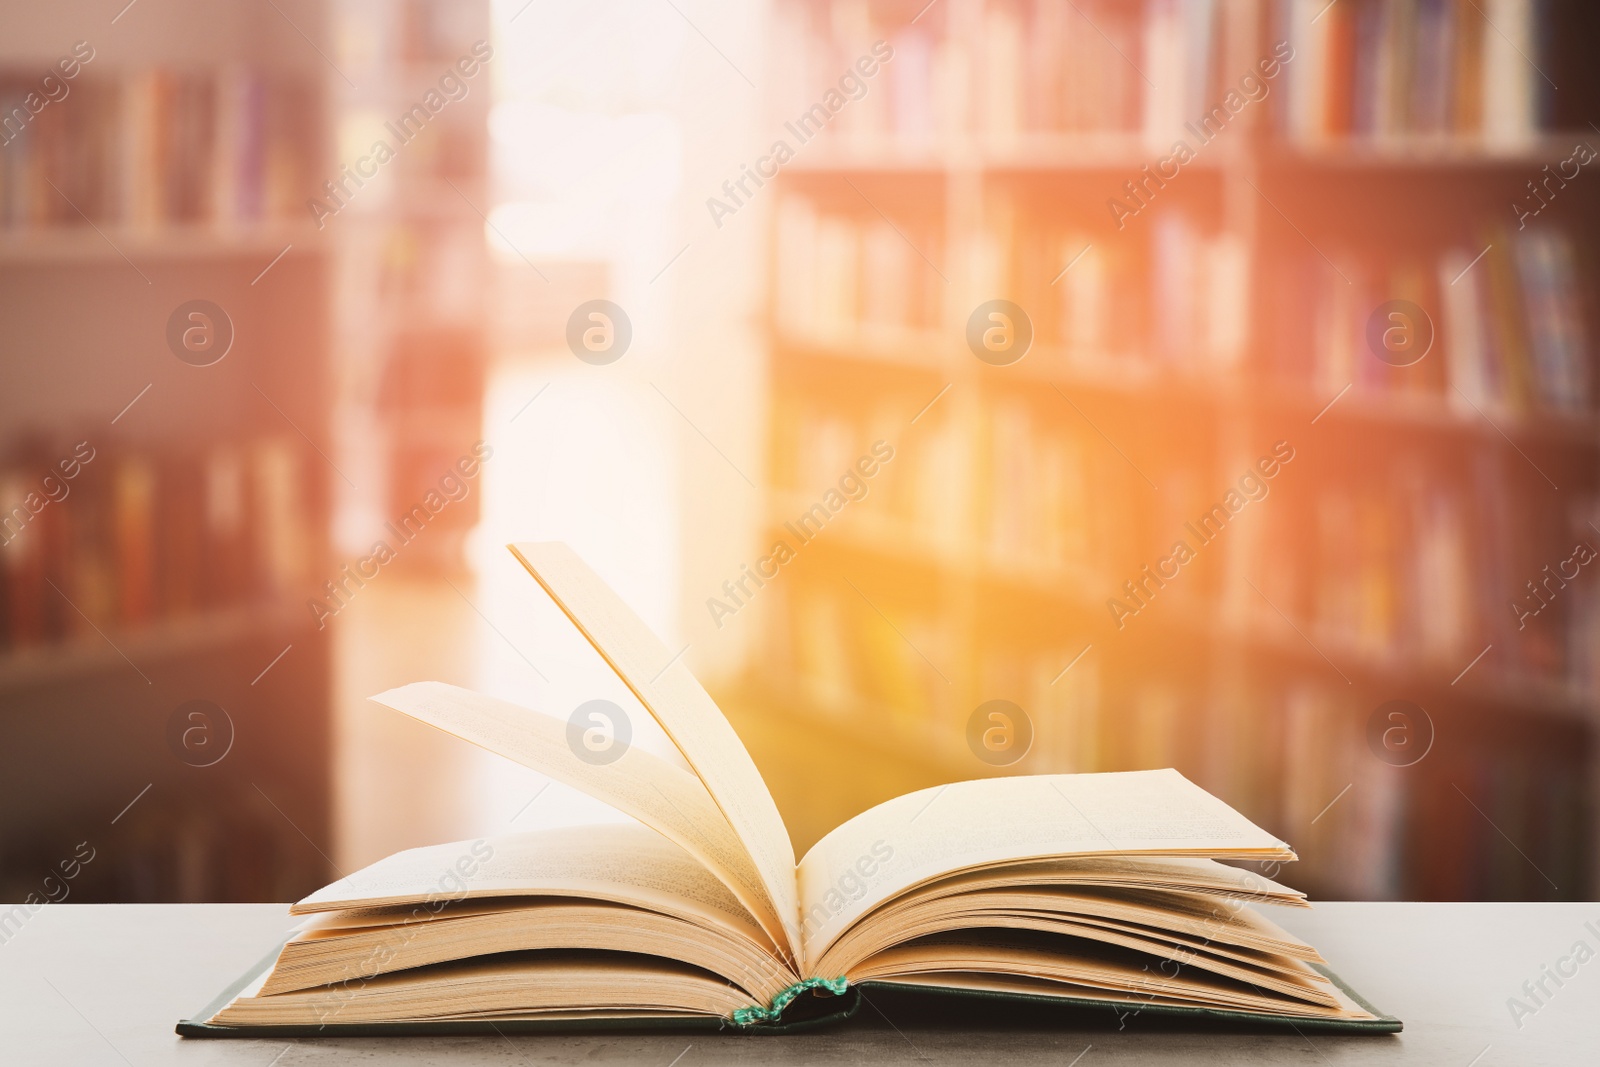 Image of Open hardcover book on table in library